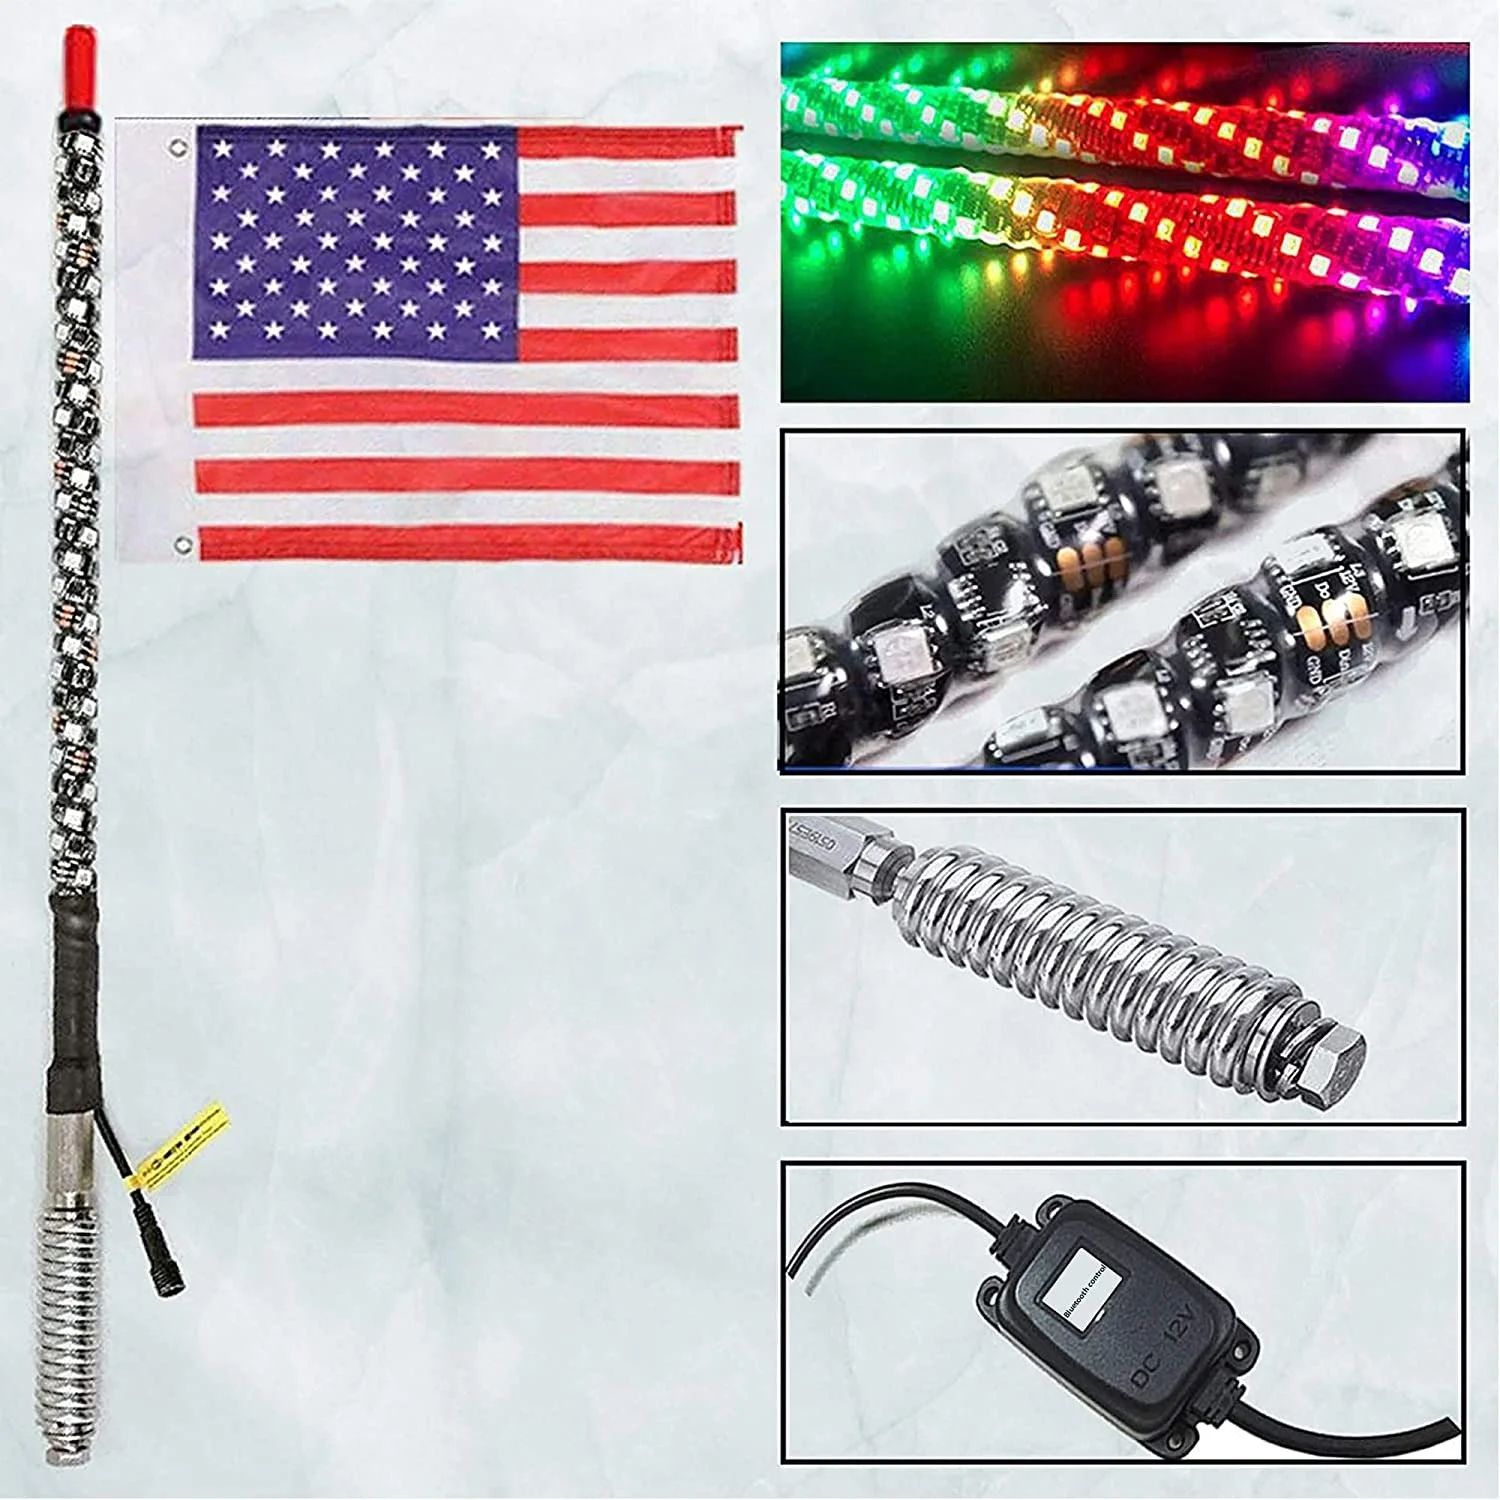 Spiral RGB Led Whip Light with Spring Base Chasing Light RF Remote Control Lighted Antenna Whips for Can am ATV UTV RZR Polaris